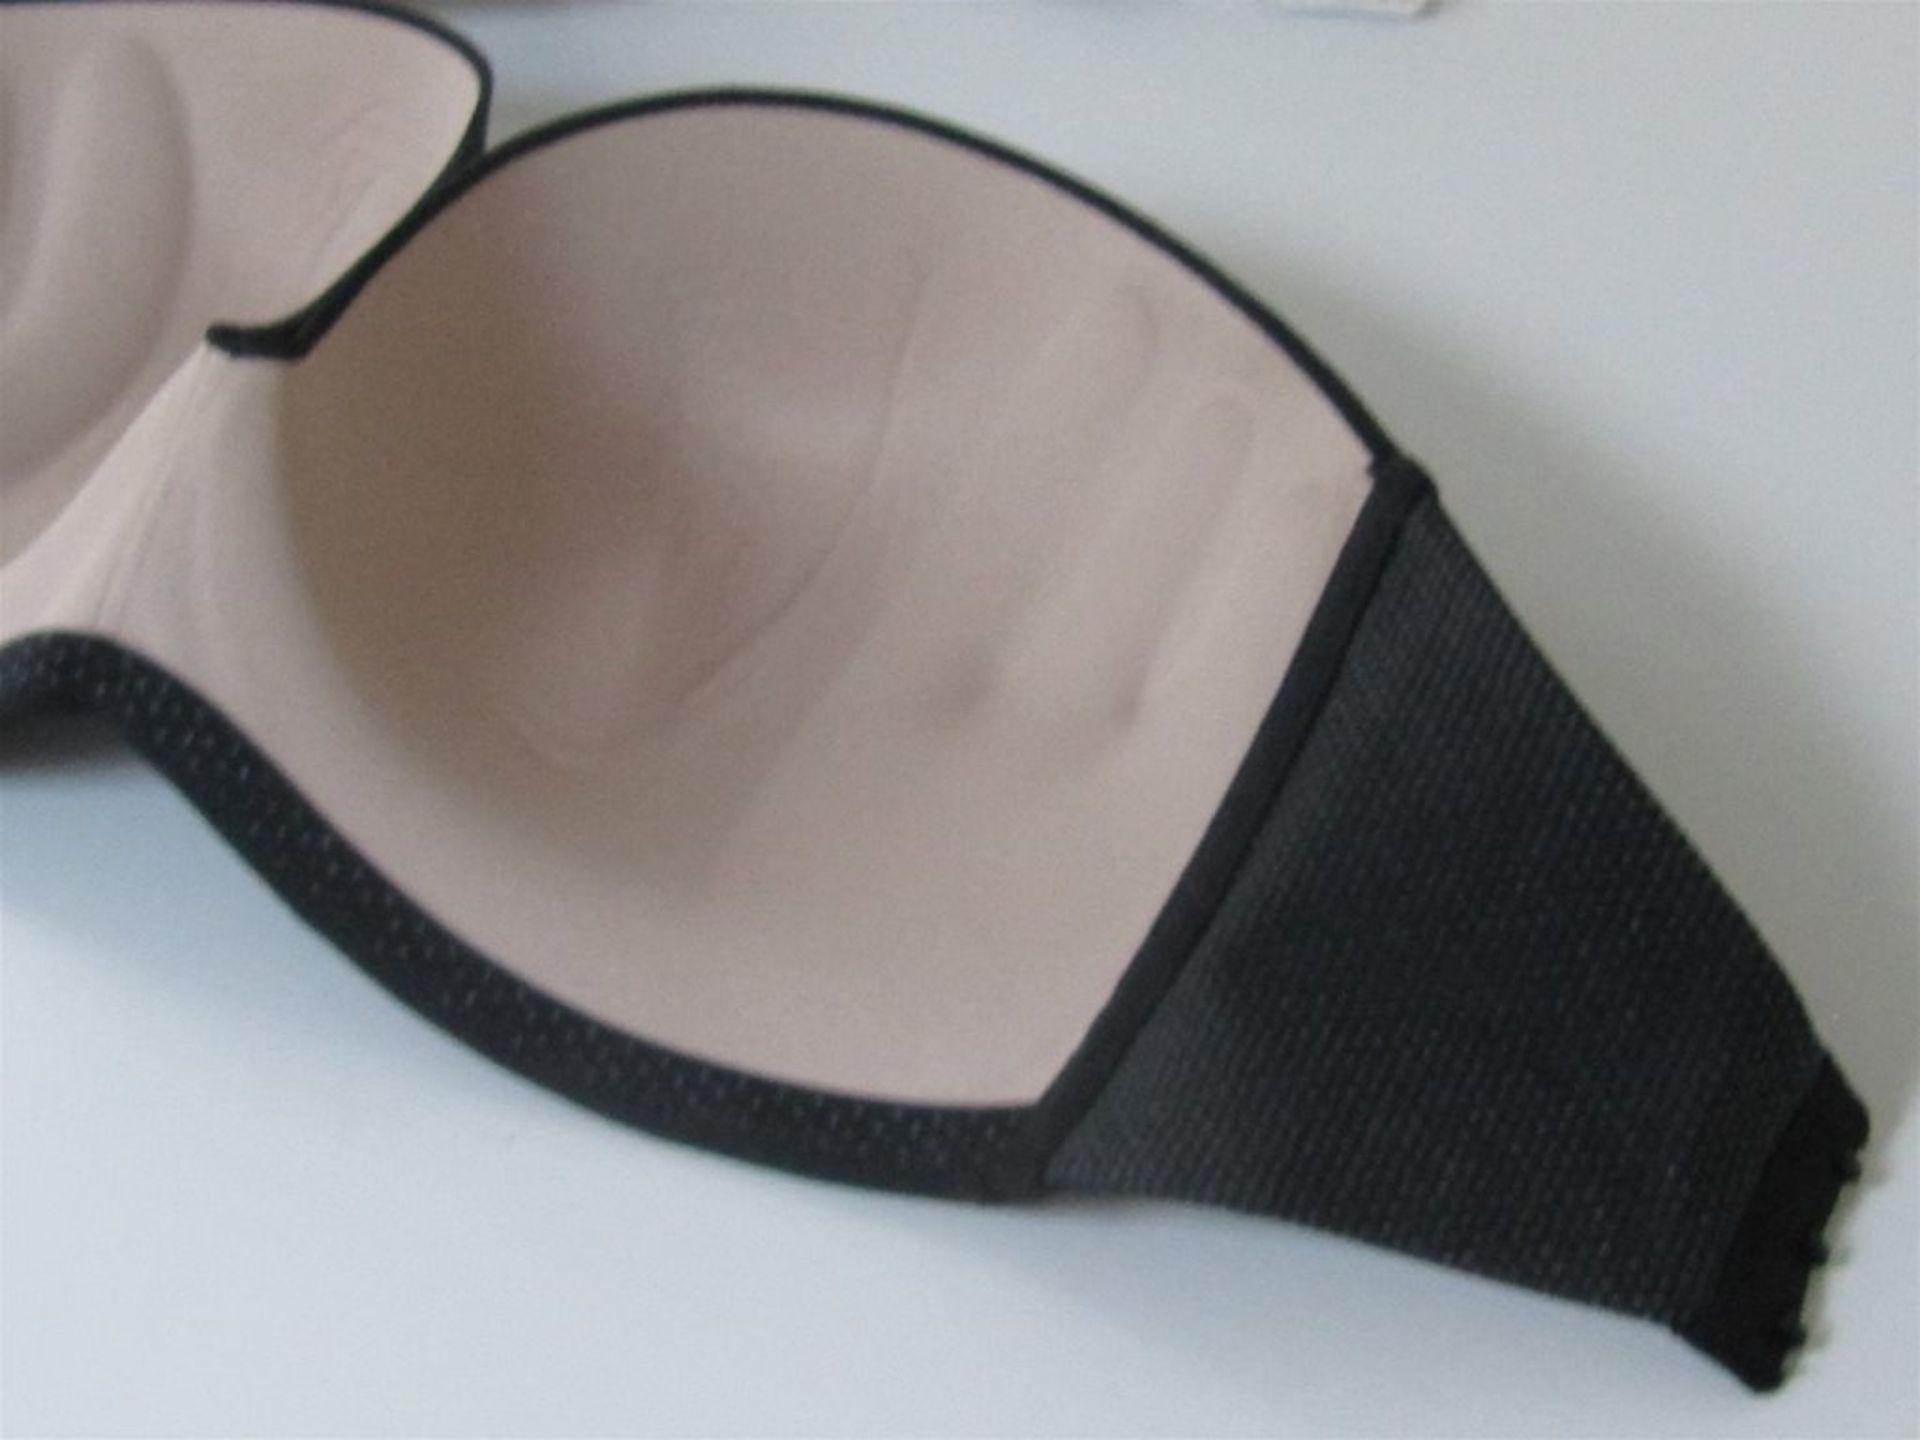 10 x Wonder Bra. Free Shipping when you Win 2 Lots or more. - Image 5 of 9